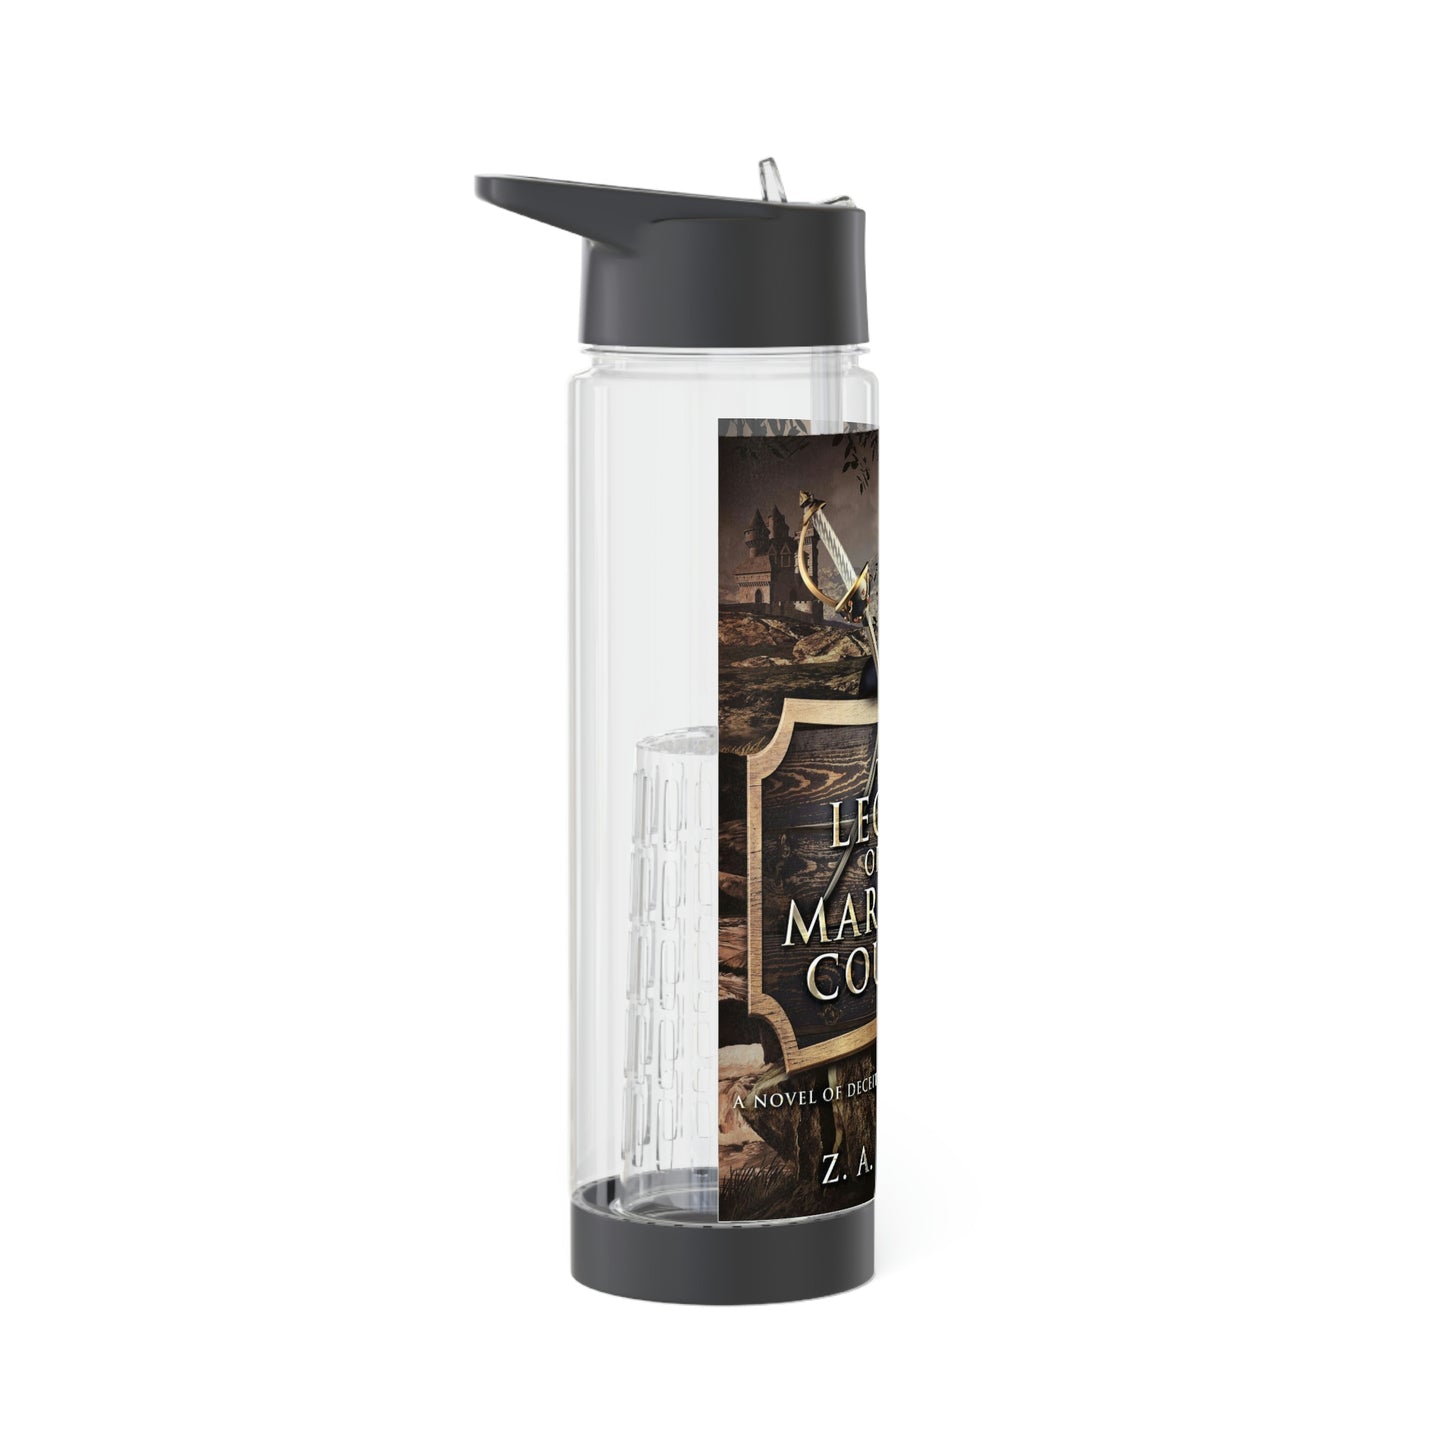 The Legacy of the Marshall Cousins - Infuser Water Bottle